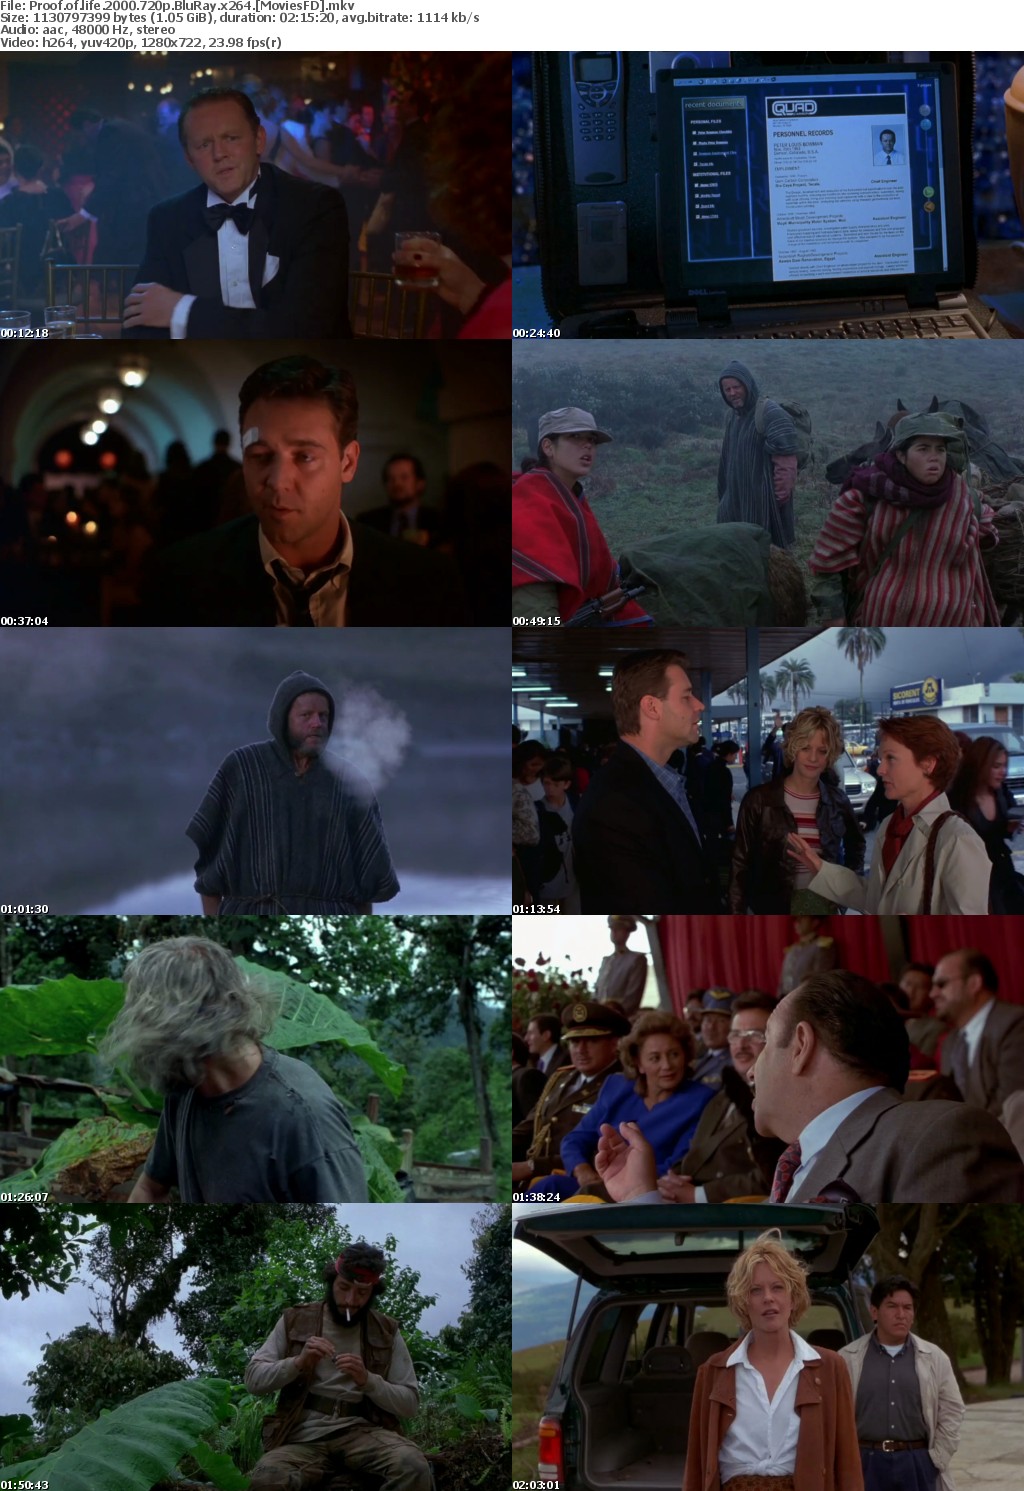 Proof of Life (2000) 720P Bluray X264 Moviesfd